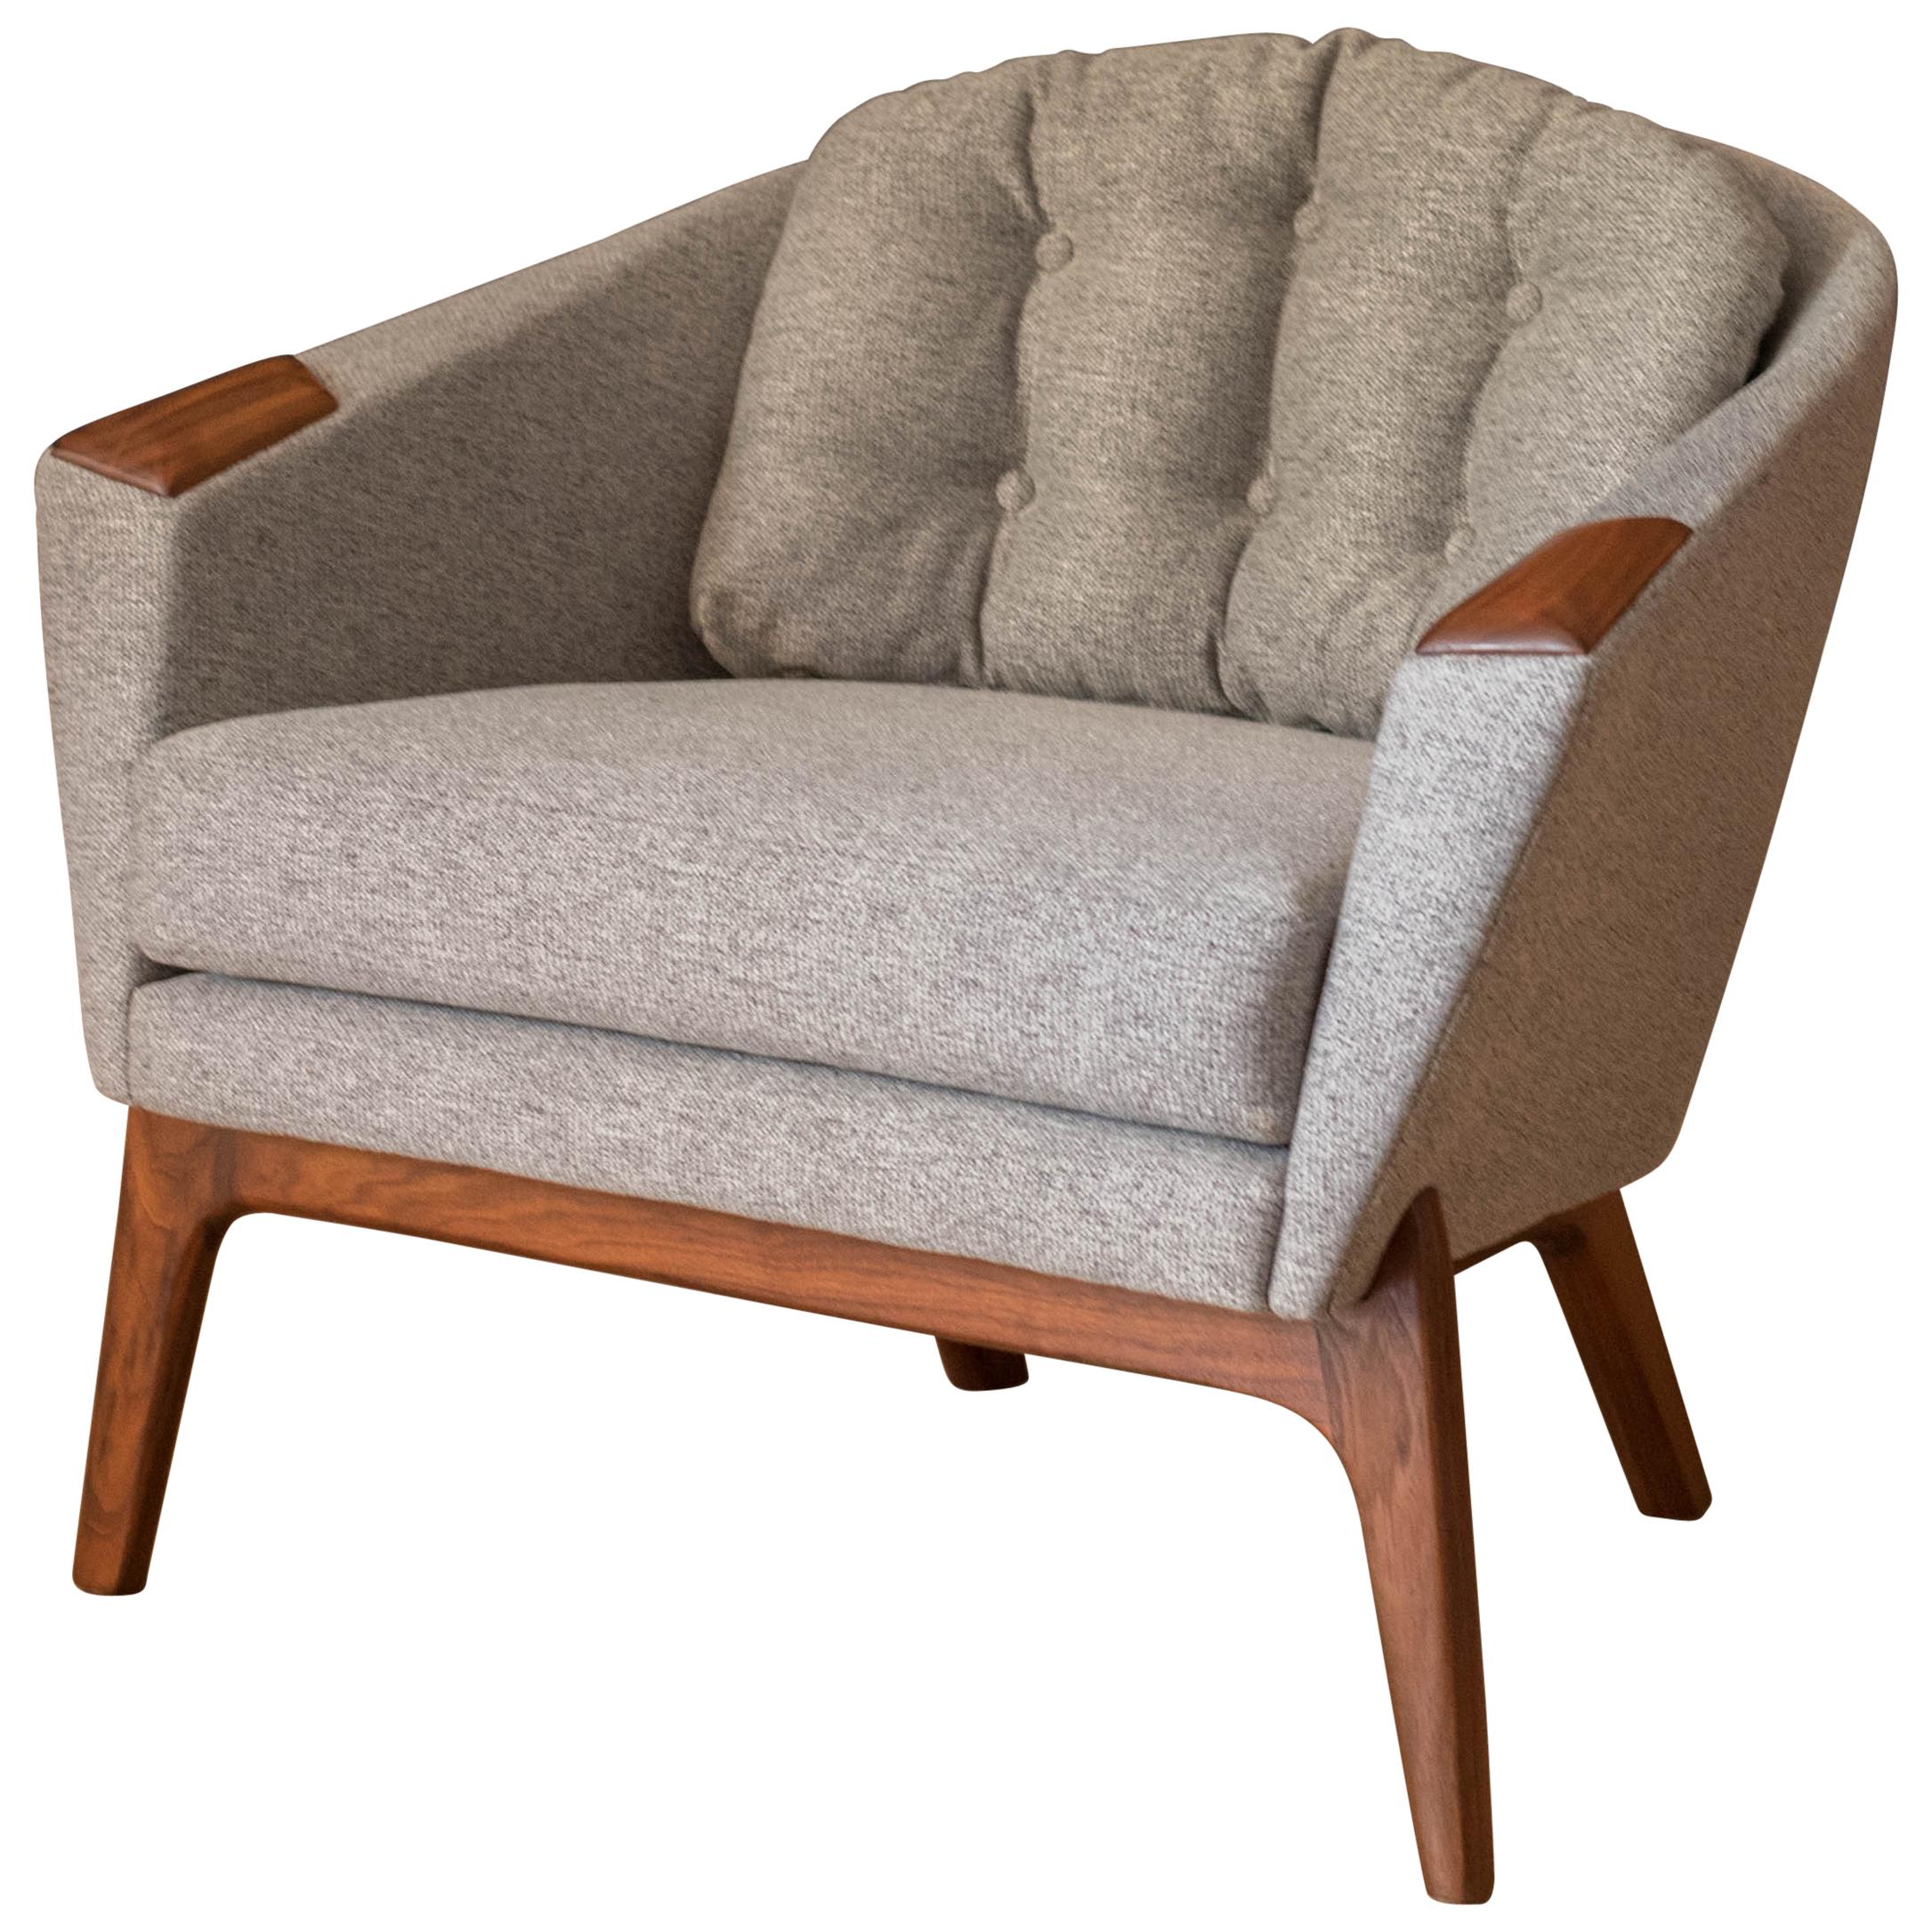 Mid Century Adrian Pearsall Walnut Lounge Chair for Craft Associates